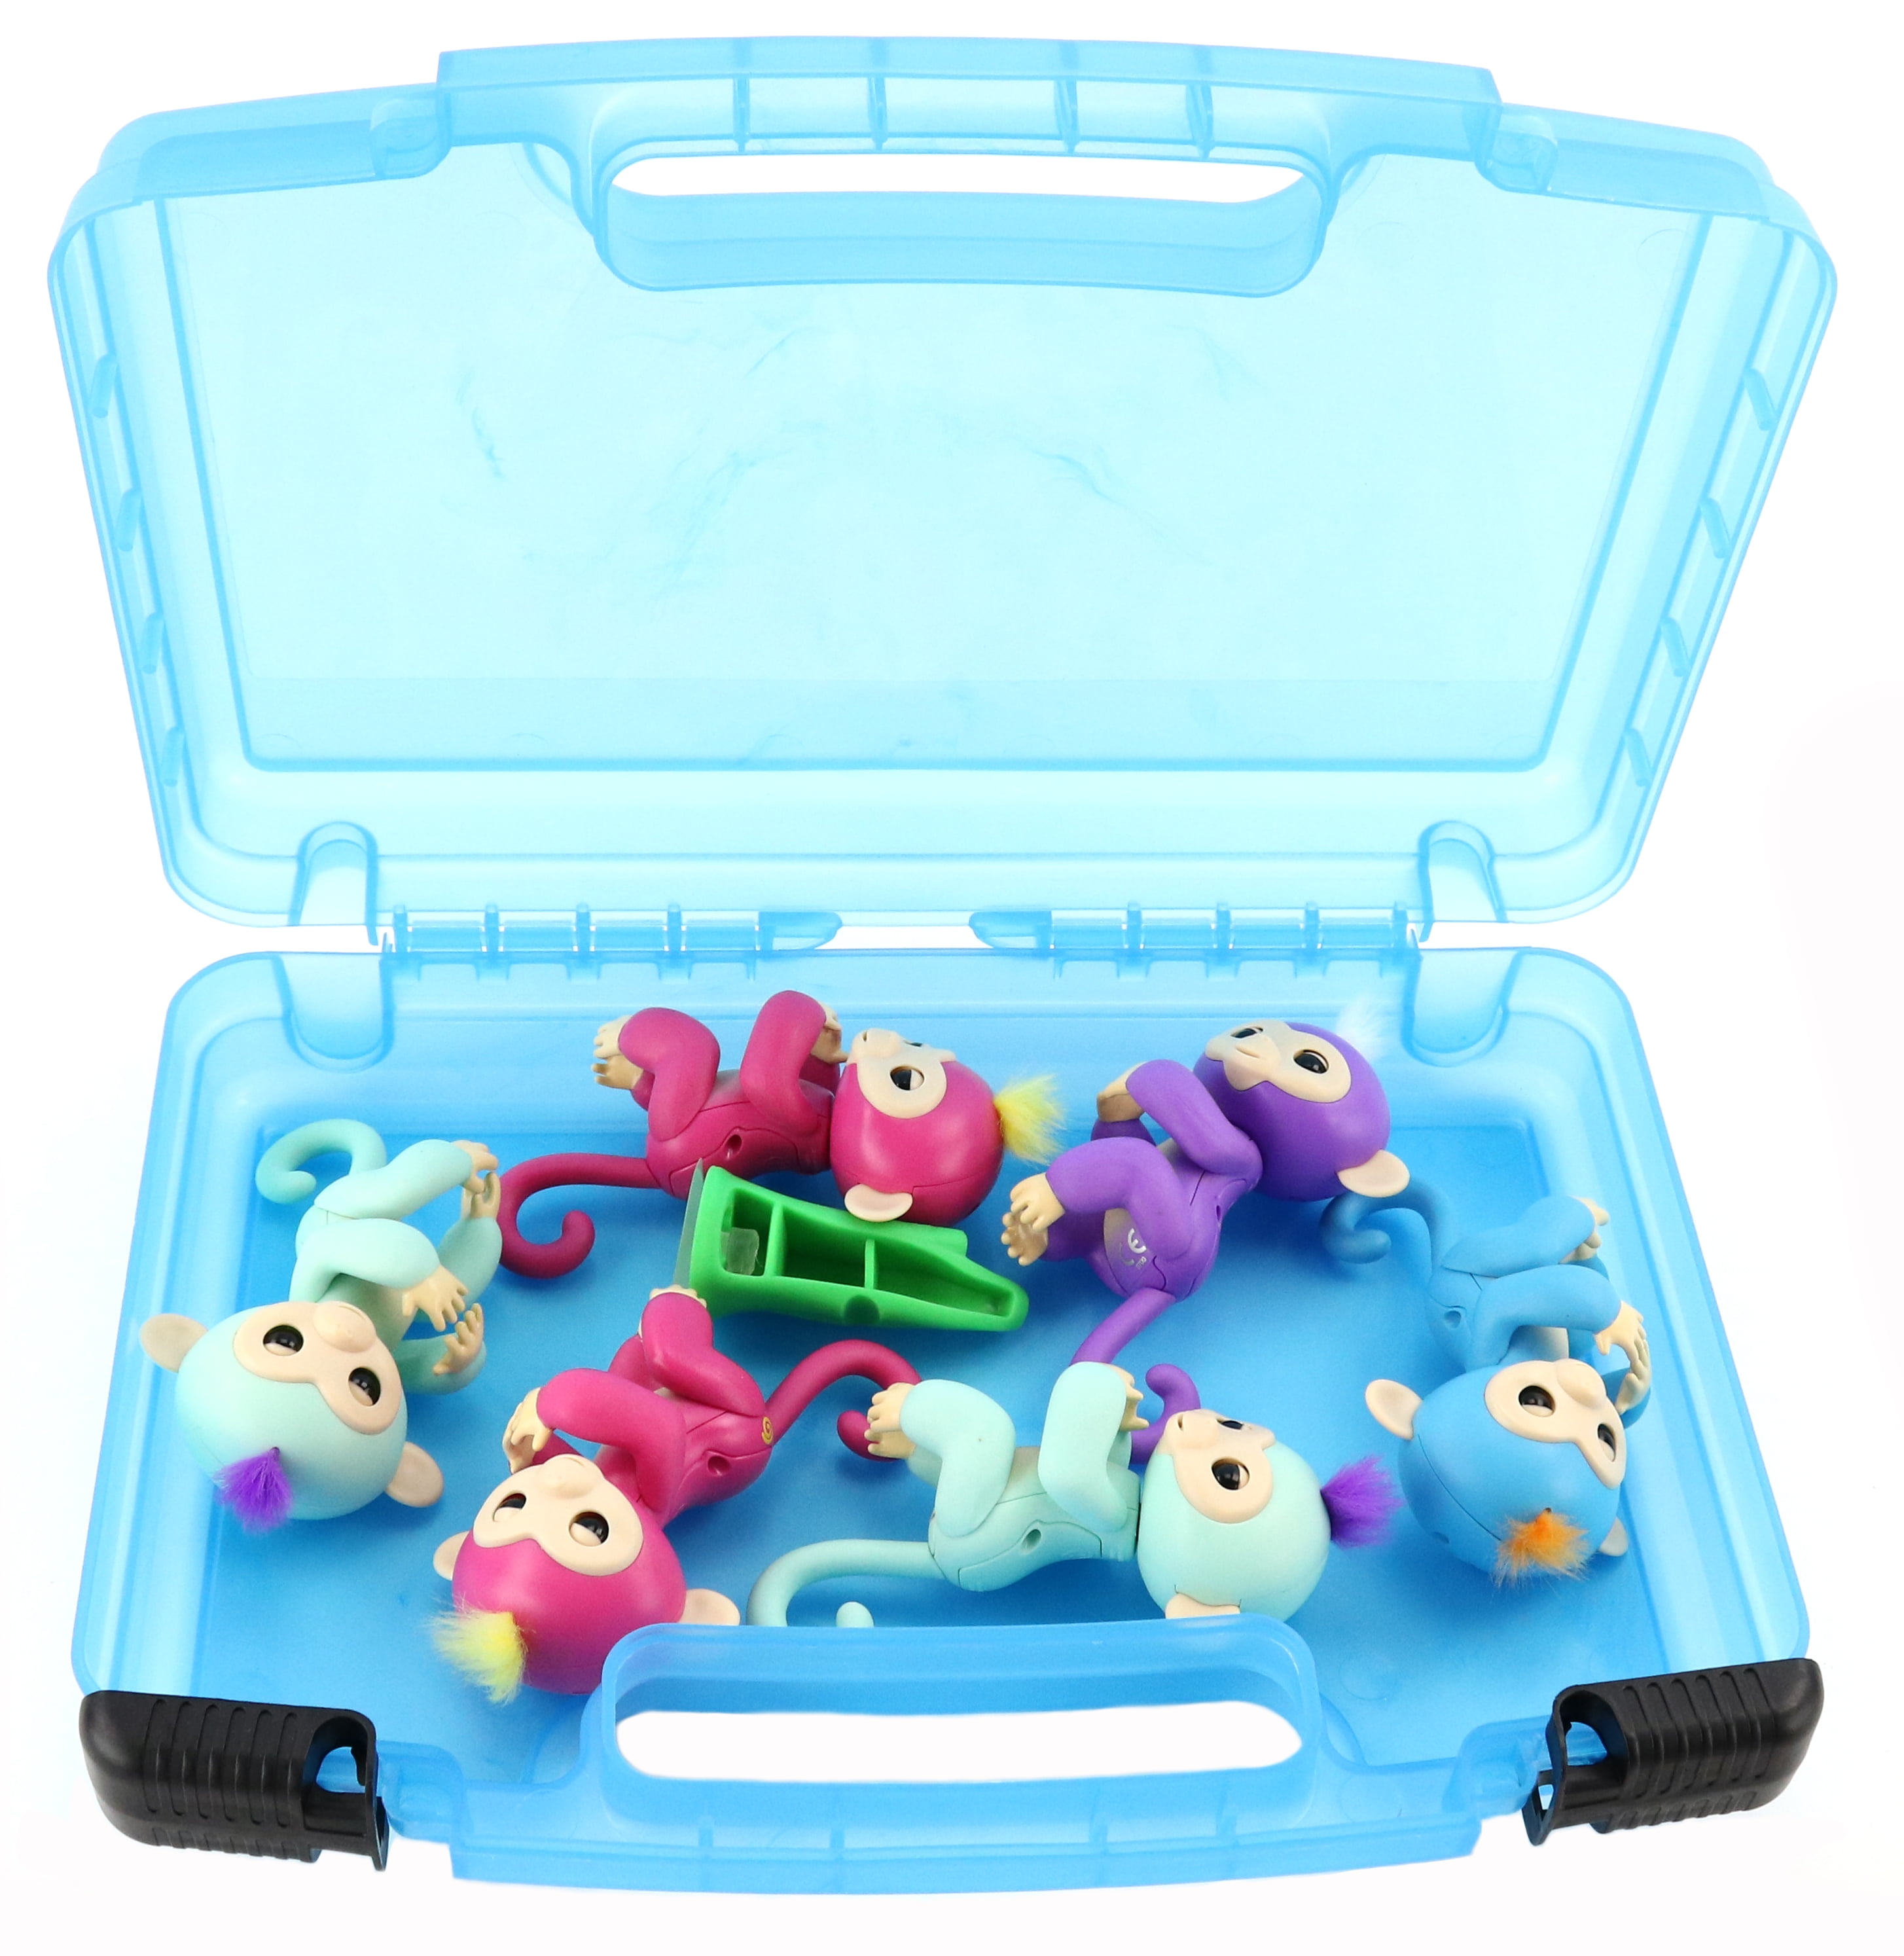 Roblox Carrying Case Stores Dozens Of Figures Durable Toy Storage Organizers By Life Made Better Green Walmart Com Walmart Com - roblox toolkitfigure carry case